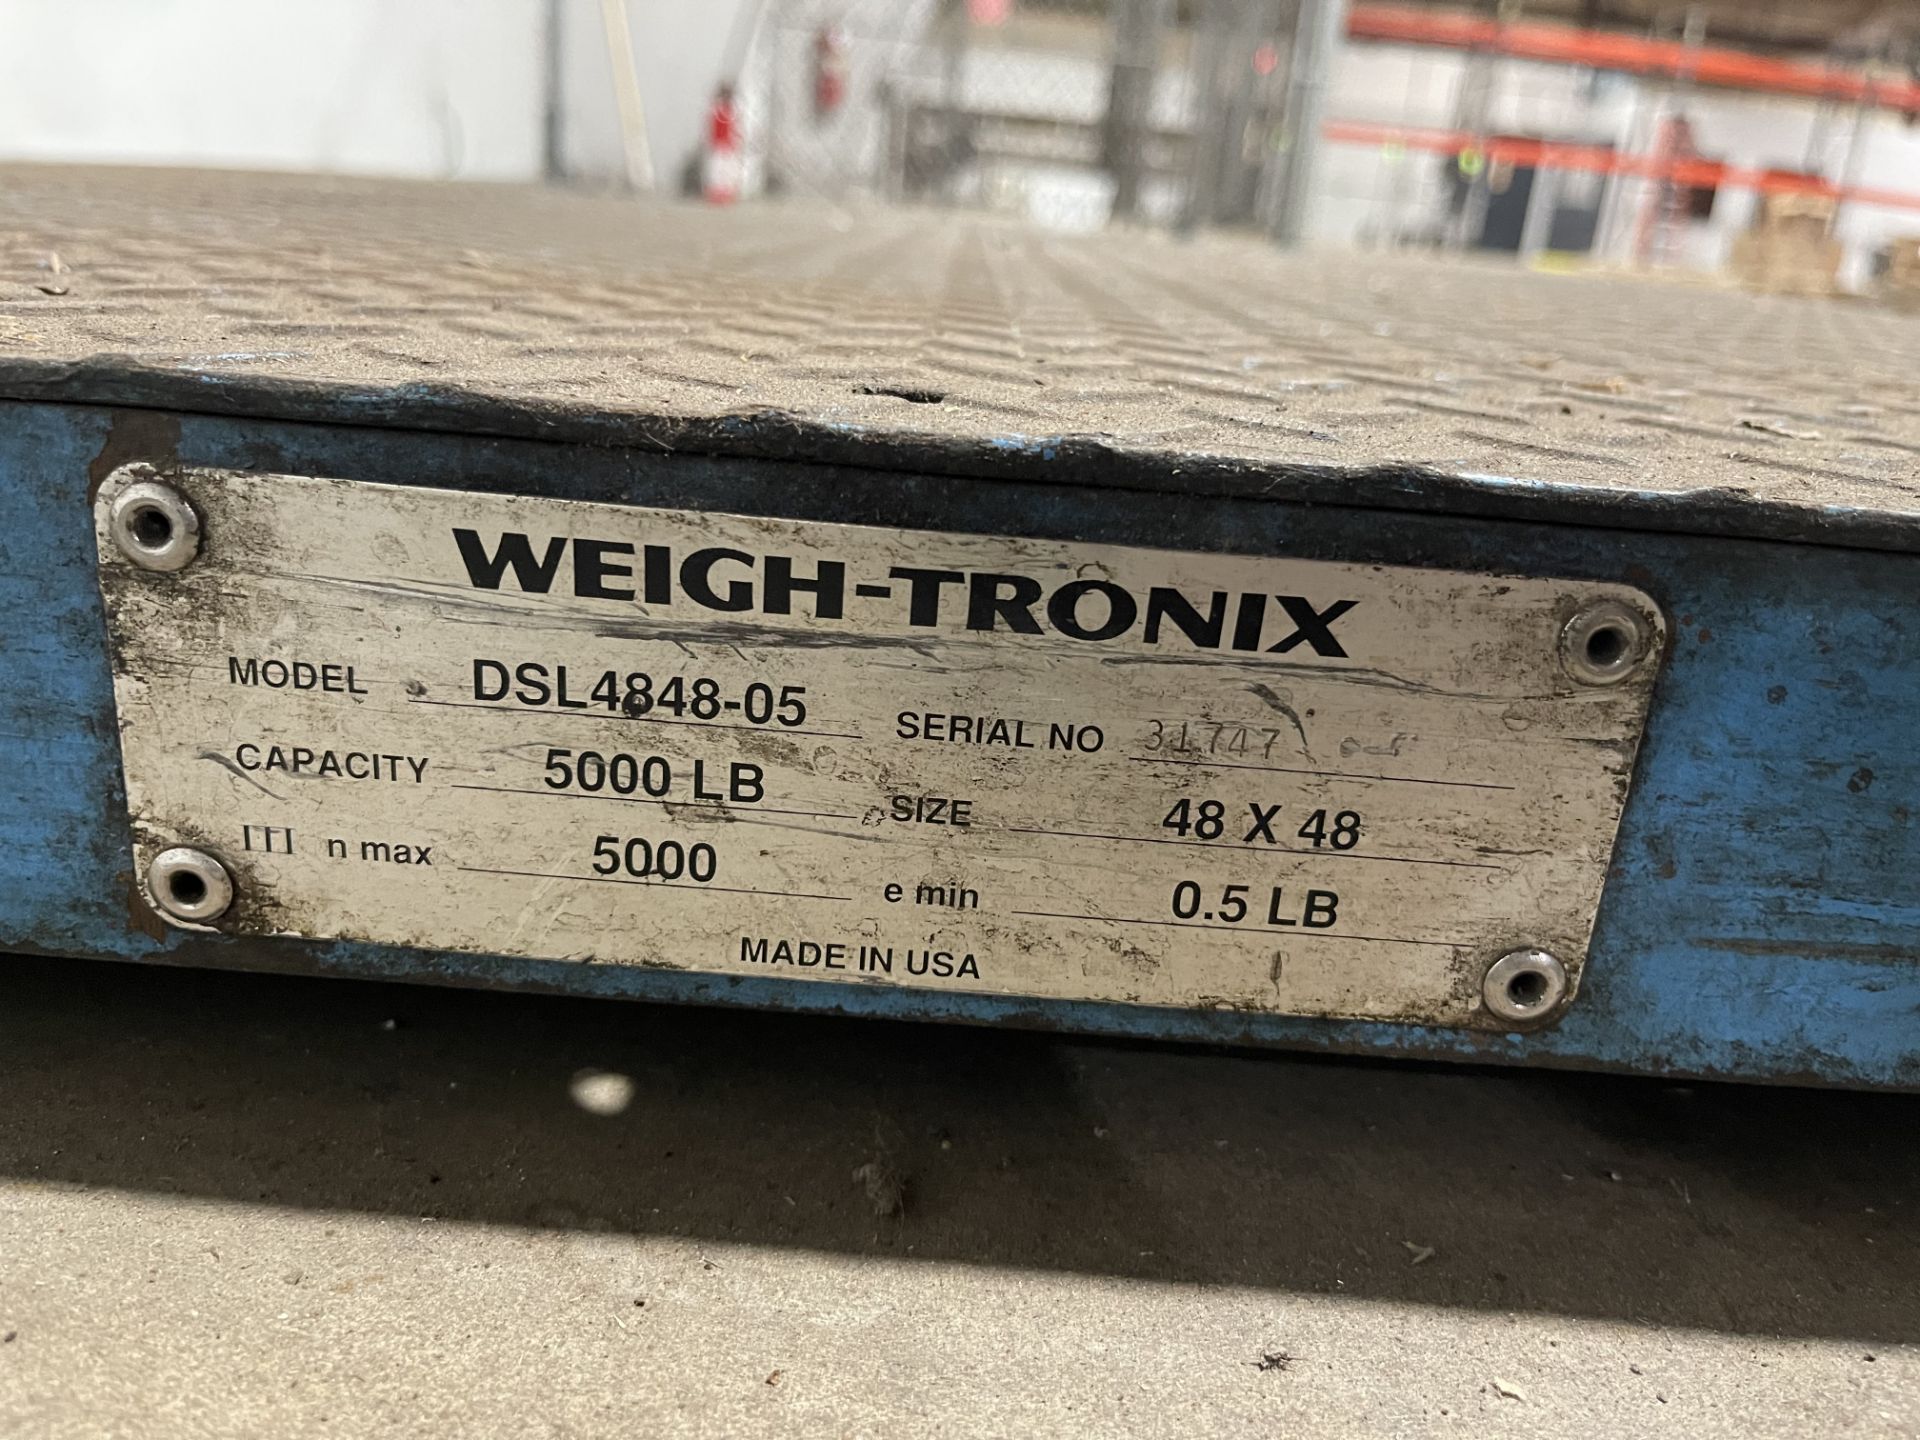 WEIGH-TRONIX PALLET SCALE WITH DIGITAL WALL-MOUNTED READOUT Rigging, Handling, Site Management and - Image 2 of 5